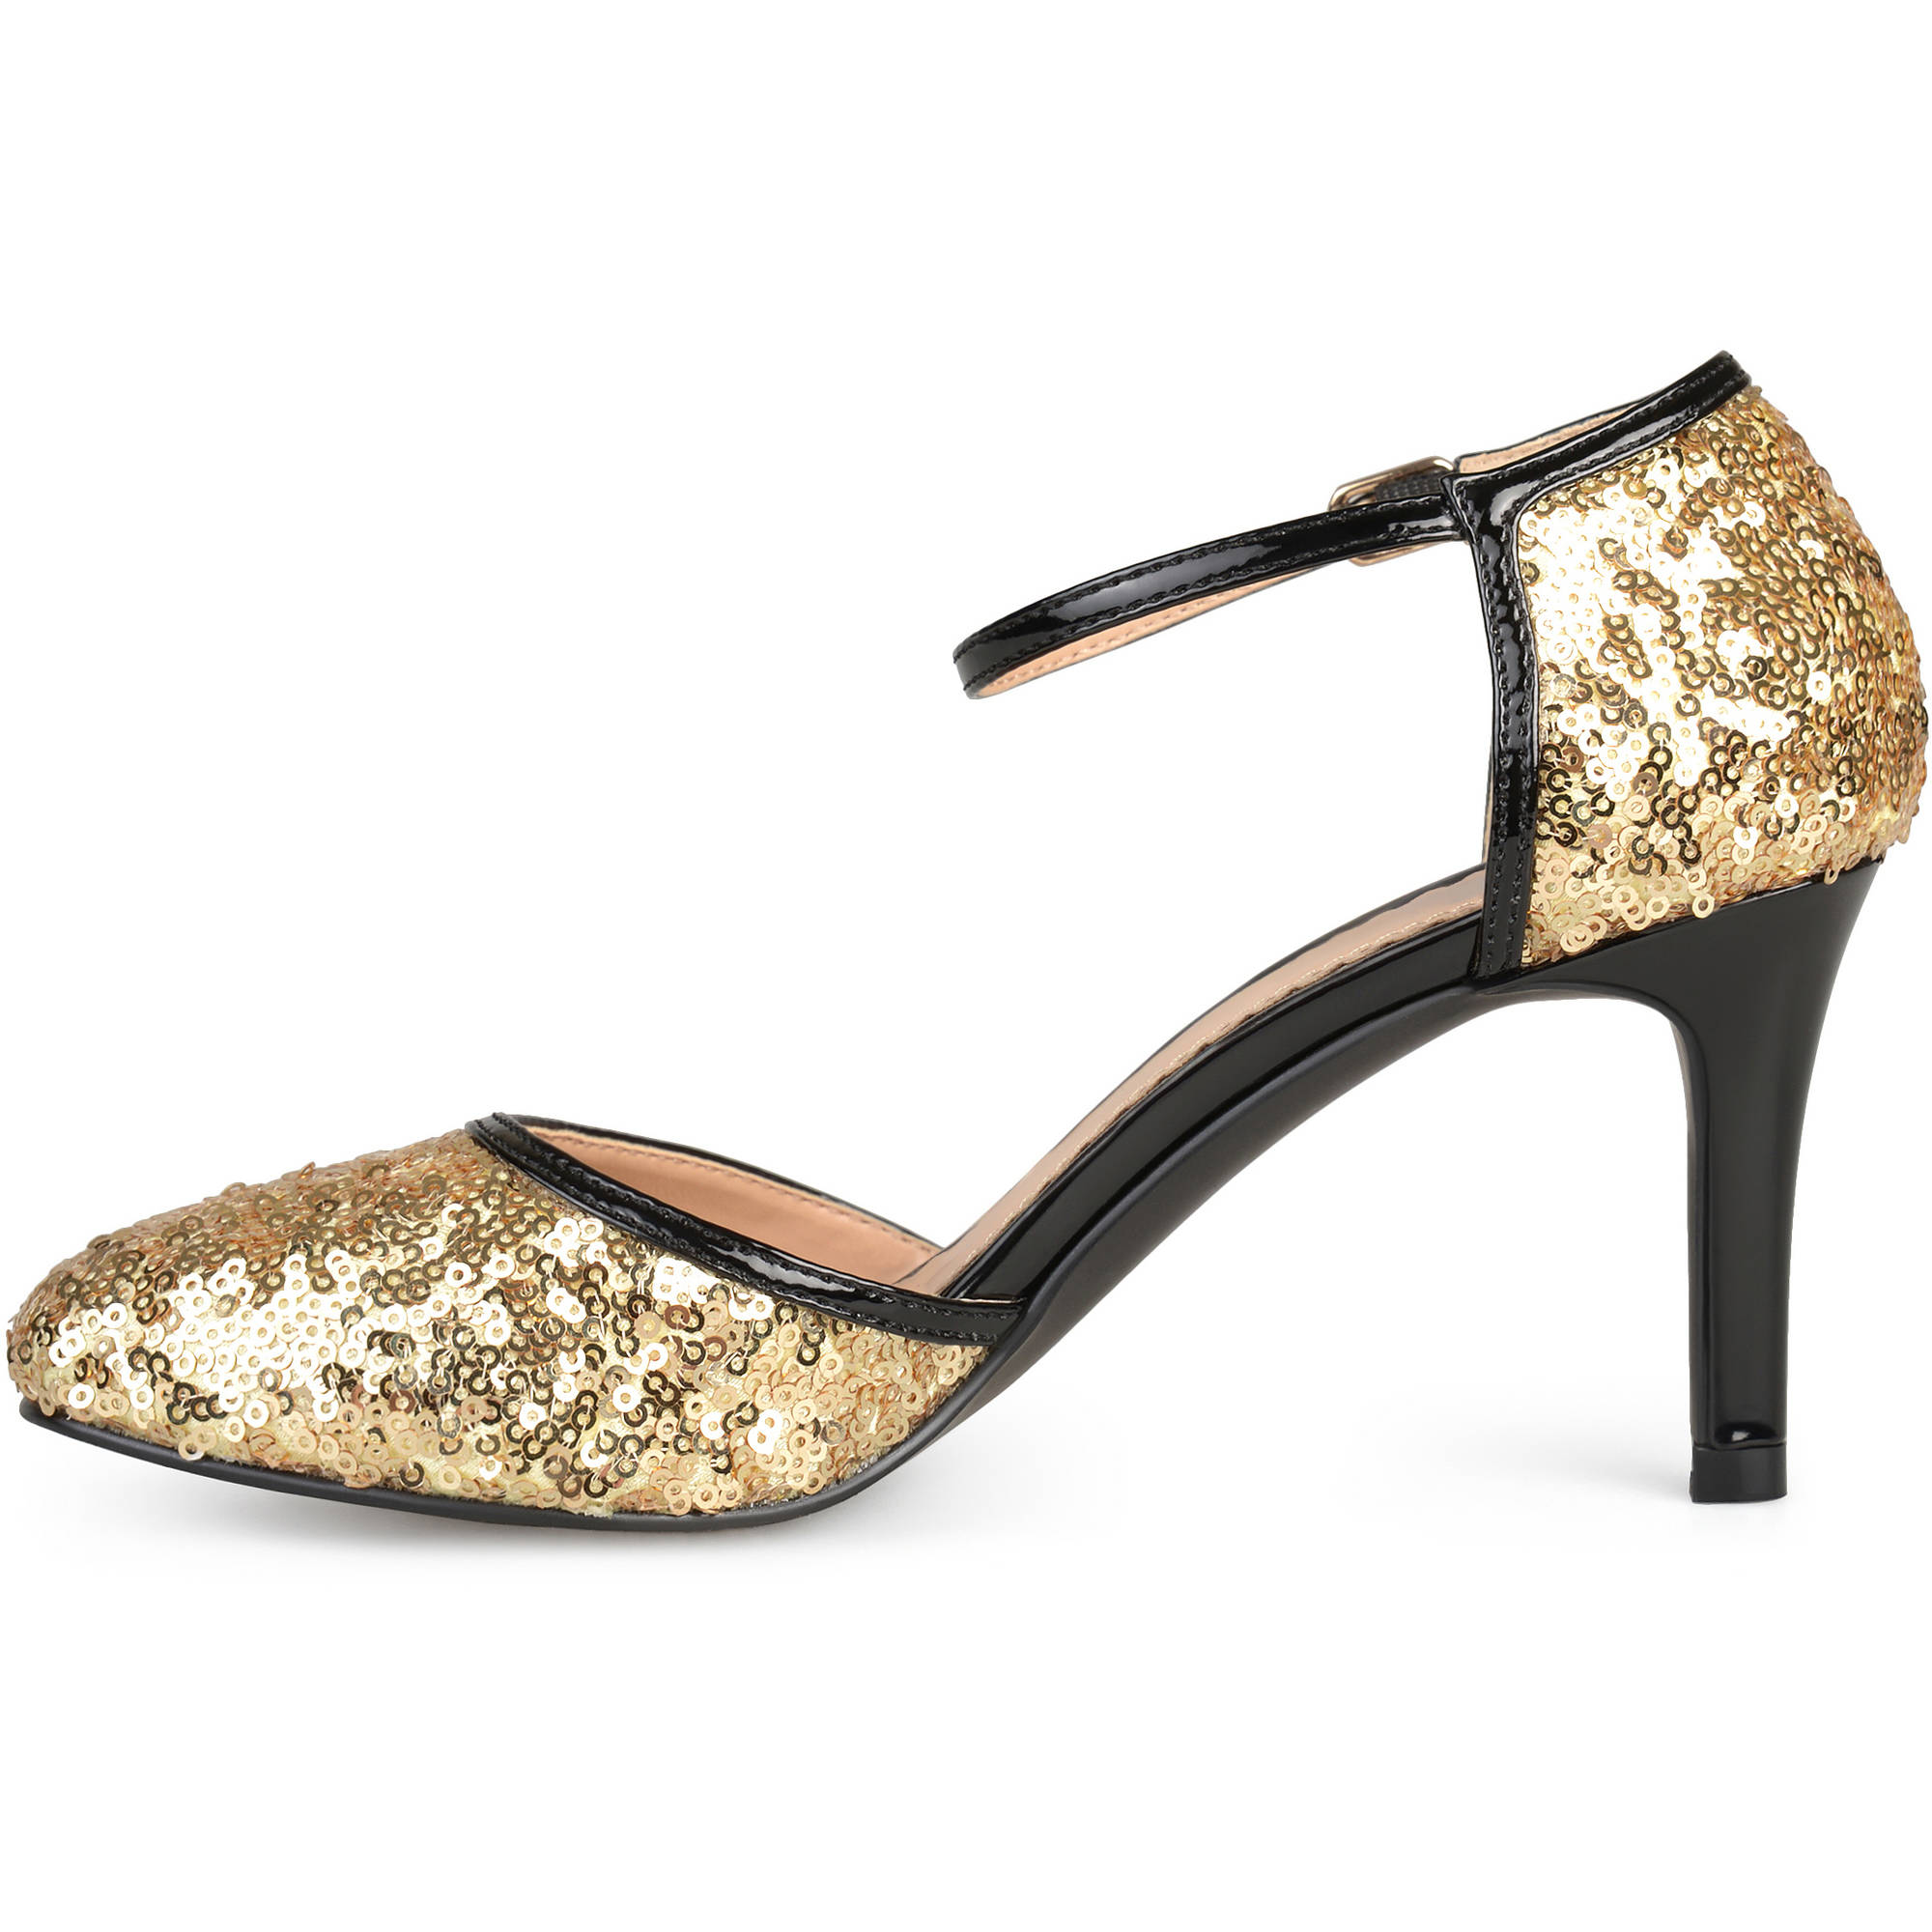 Women's Sequin Faux Leather Piping Mary Janes - image 3 of 8